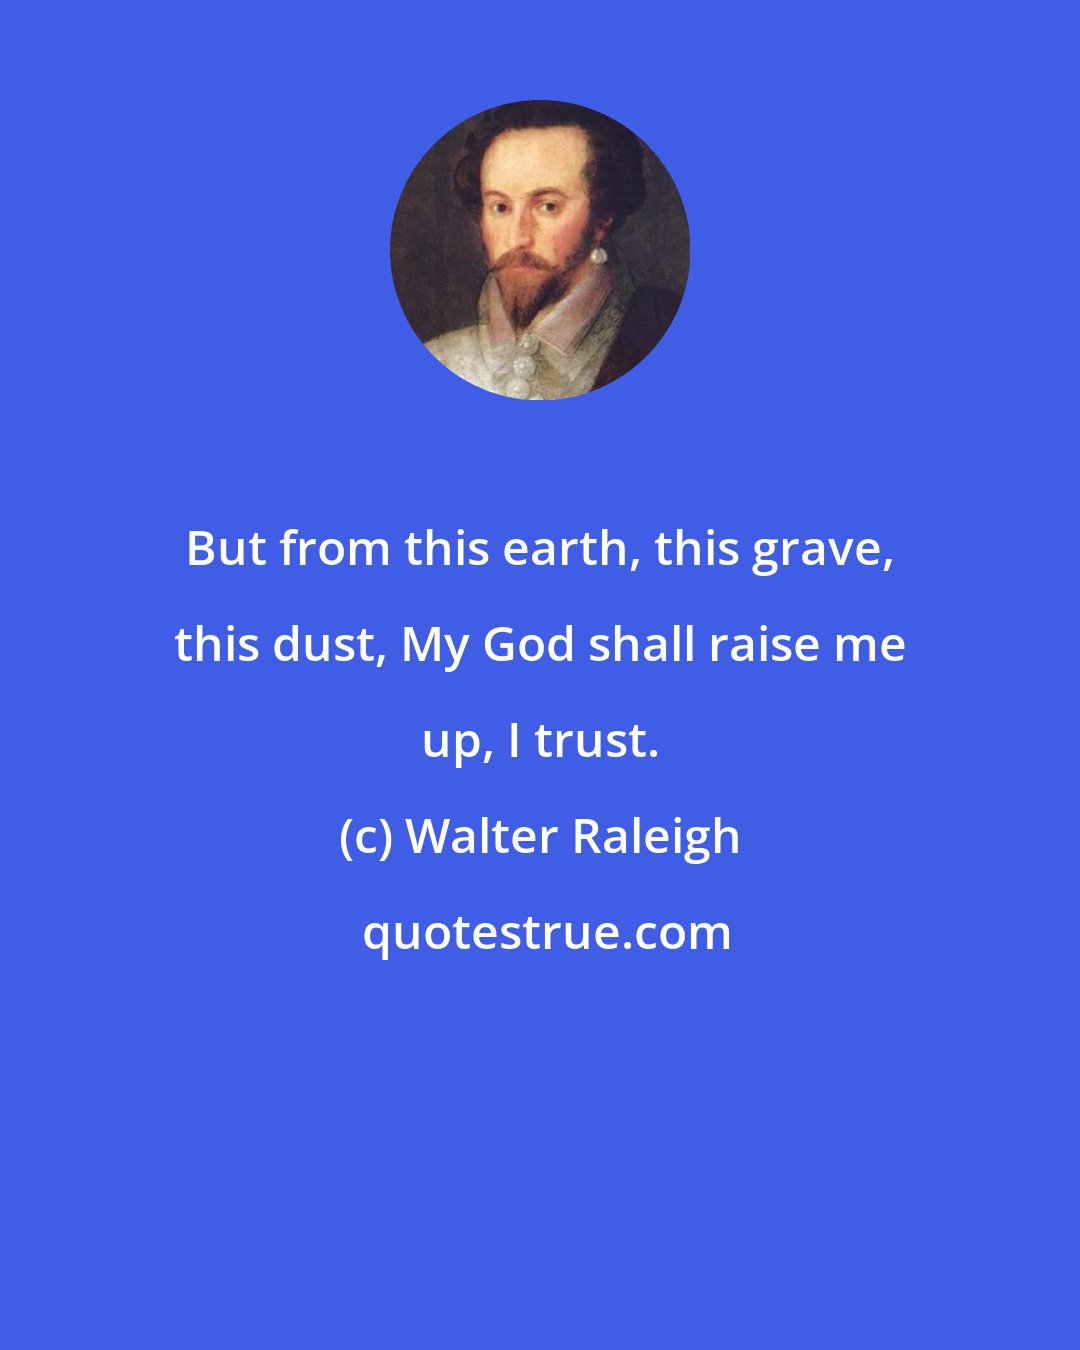 Walter Raleigh: But from this earth, this grave, this dust, My God shall raise me up, I trust.